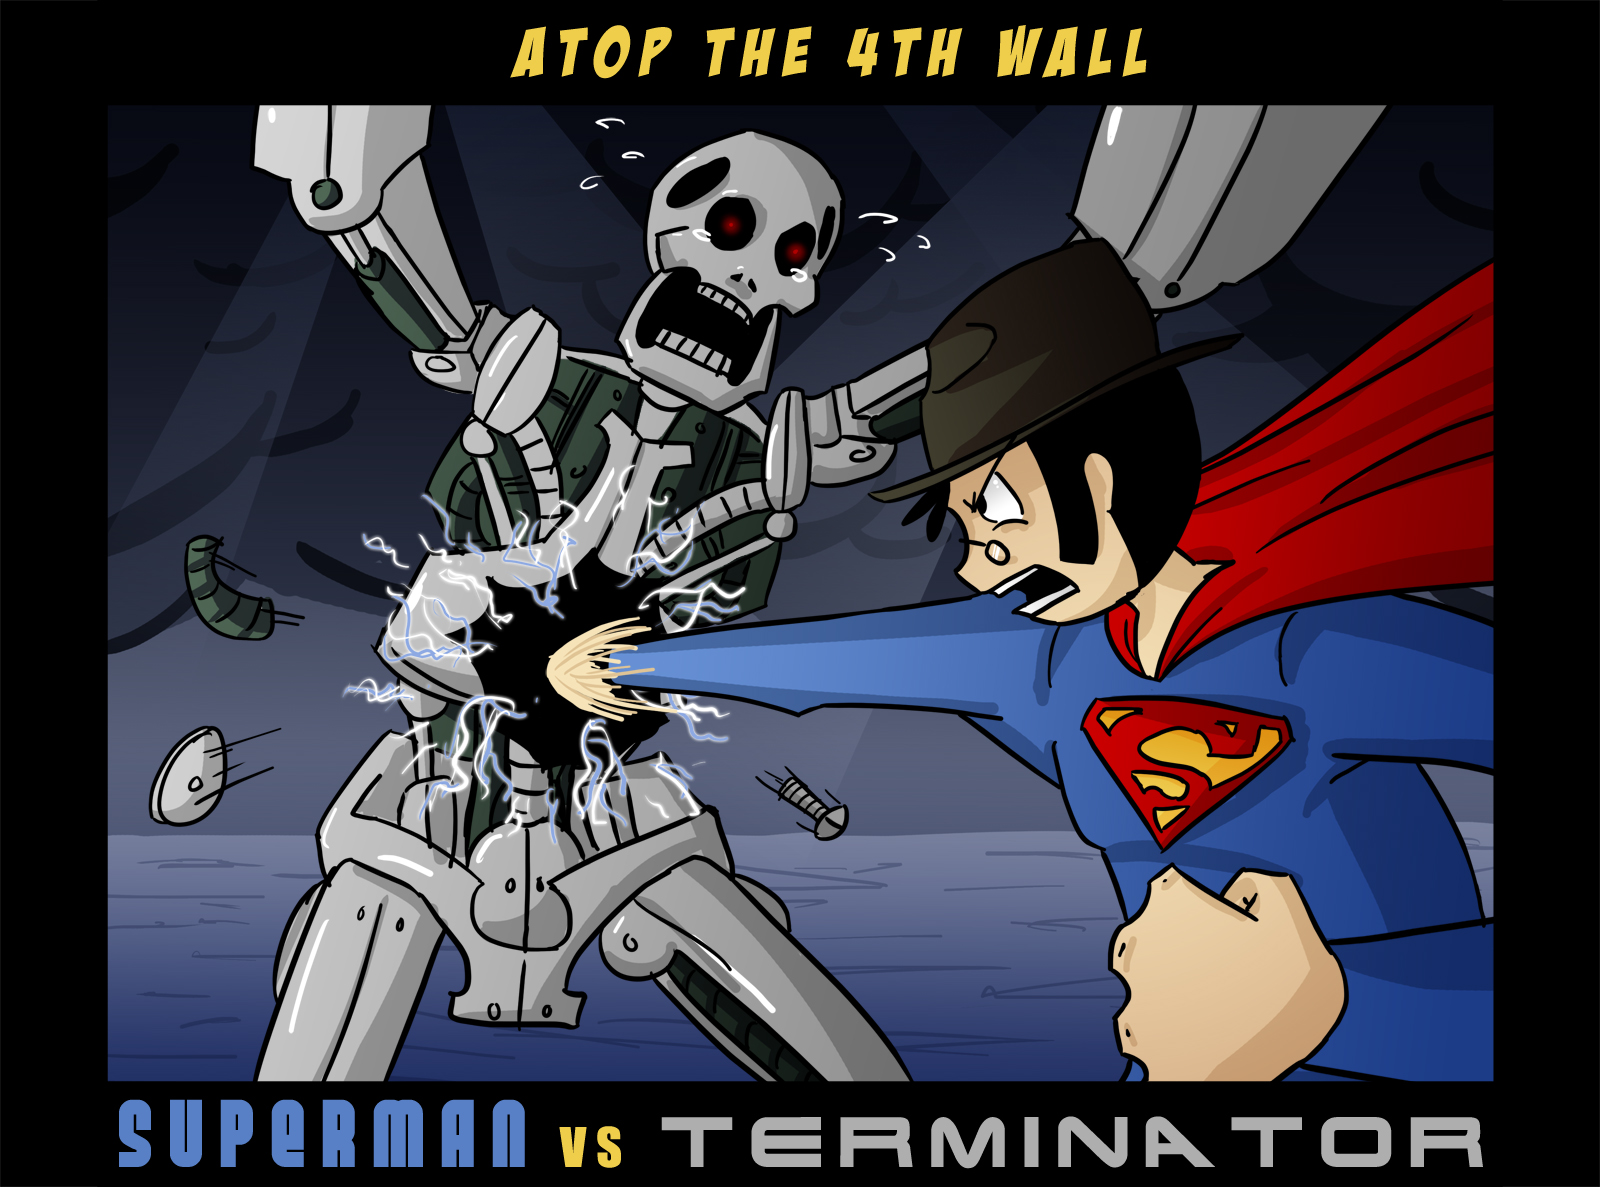 Superman vs. the Terminator #1 – Welcome to Atop the Fourth Wall!